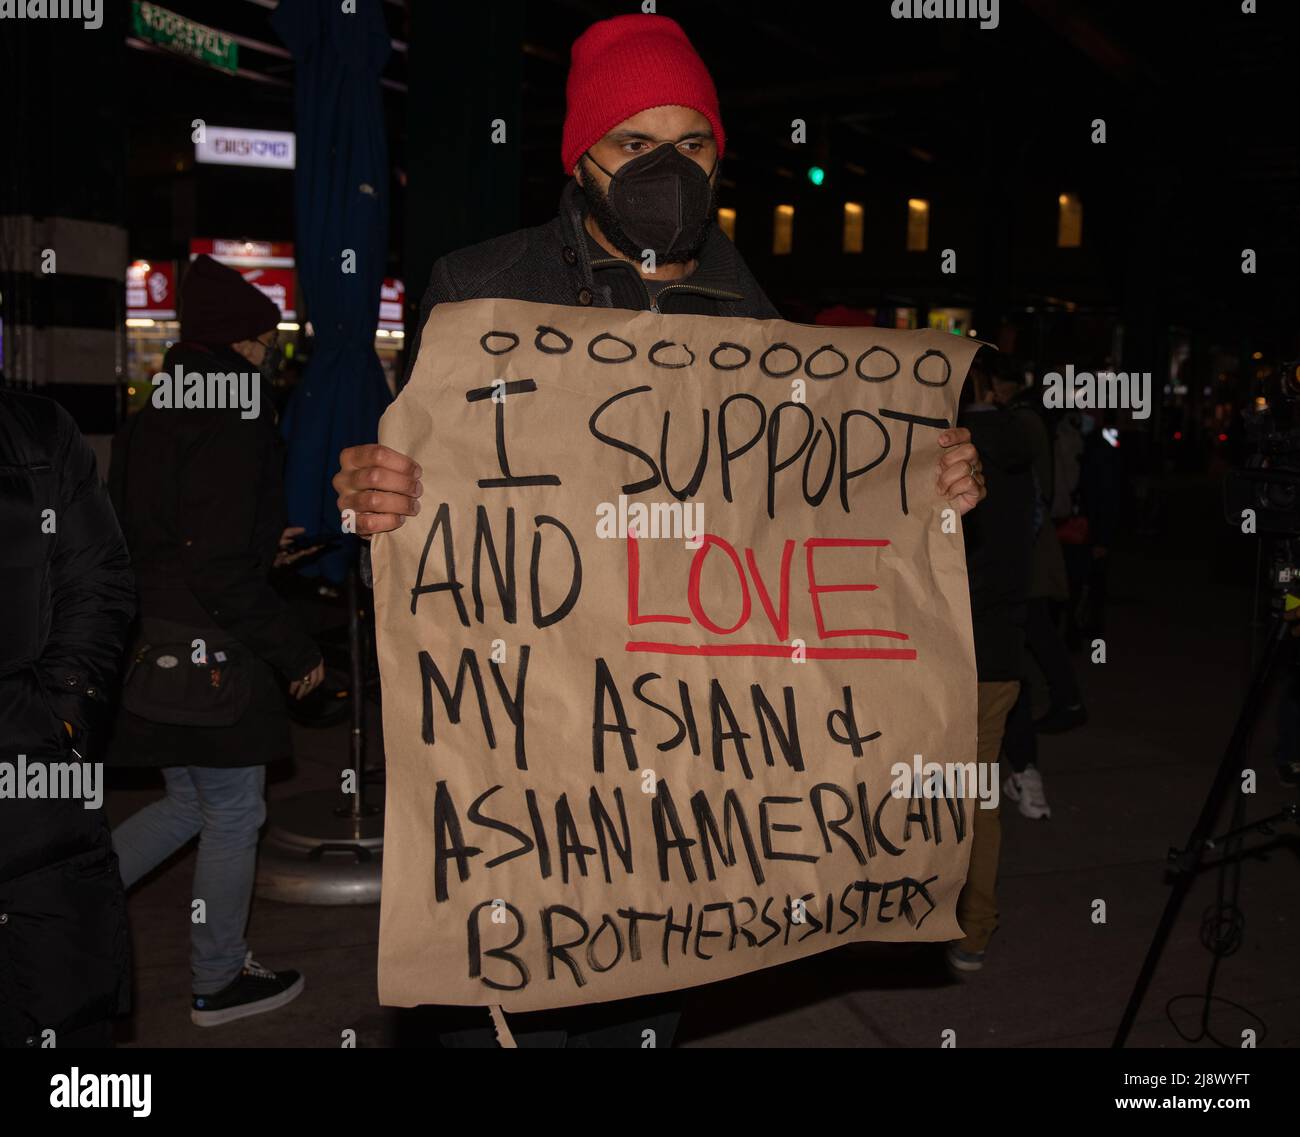 QUEENS, N.Y. – March 17, 2021: A demonstrator is seen in Jackson Heights during a vigil for victims of anti-Asian violence. Stock Photo